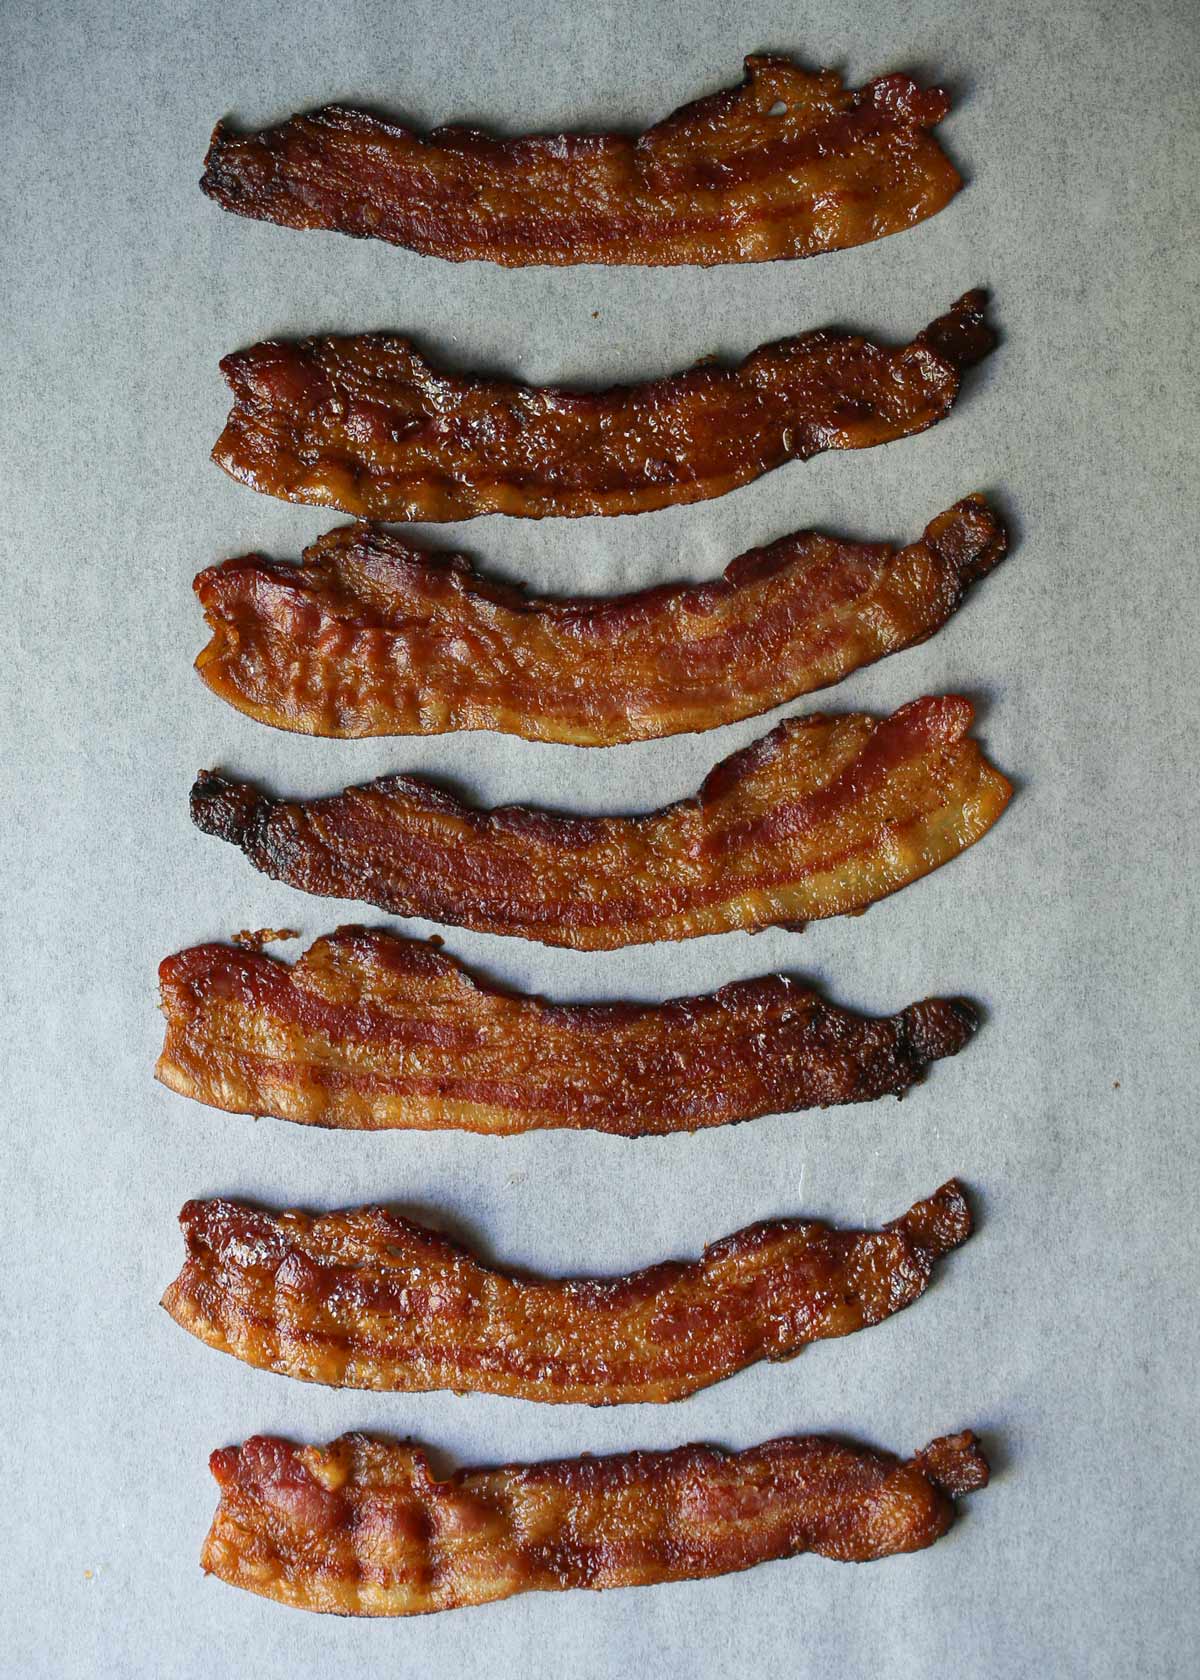 cooked bacon laid out on parchment paper.